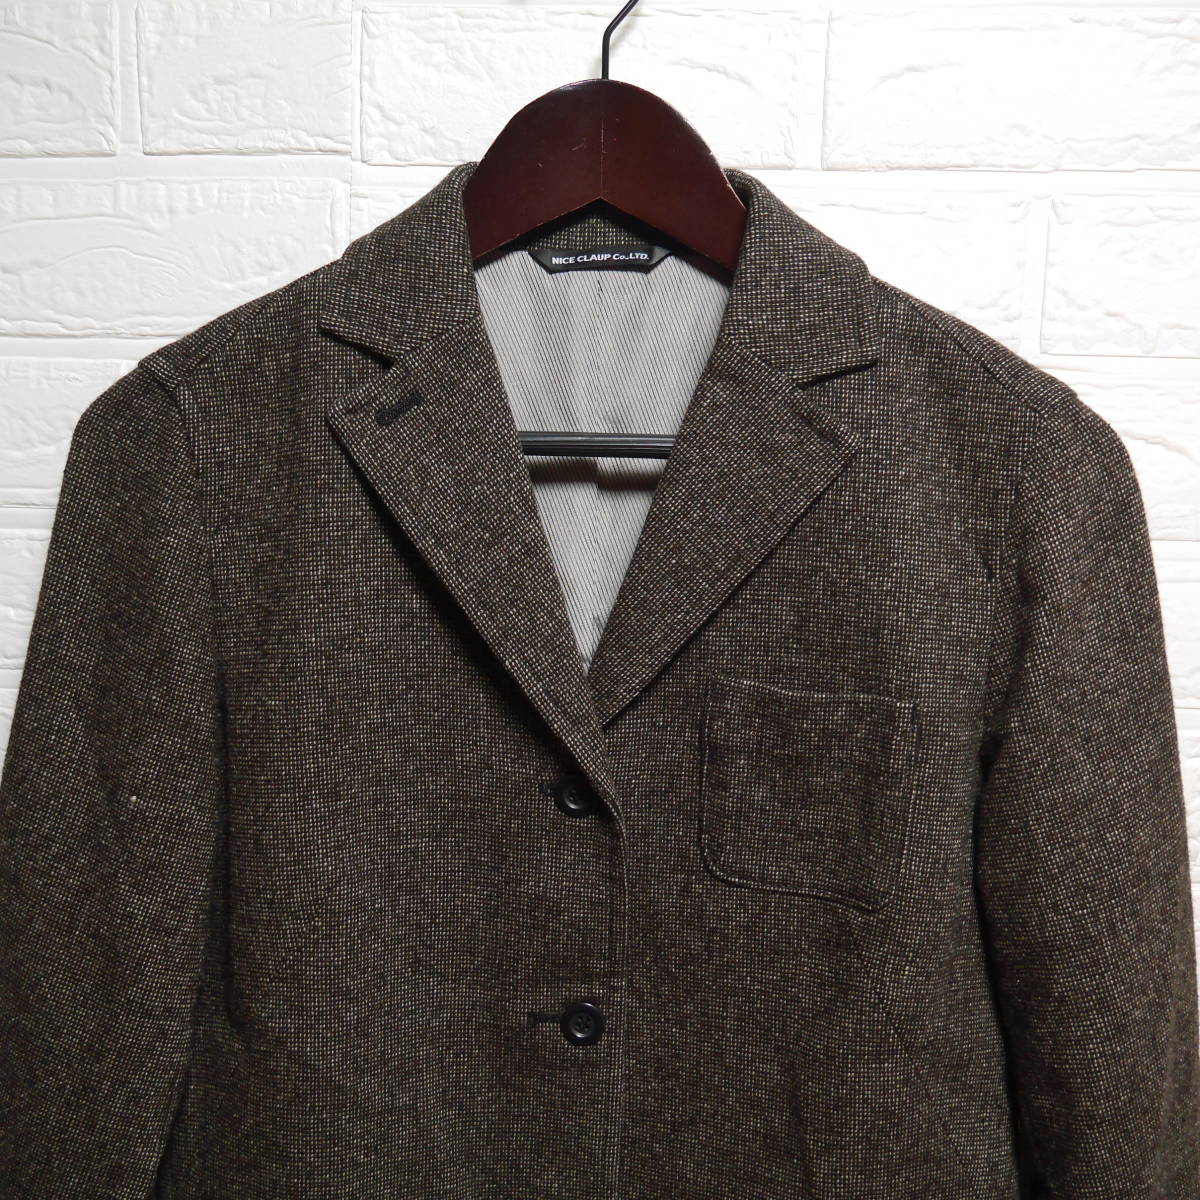 A586 * NICE CLAP | Nice Claup jacket light brown group used size inscription none 